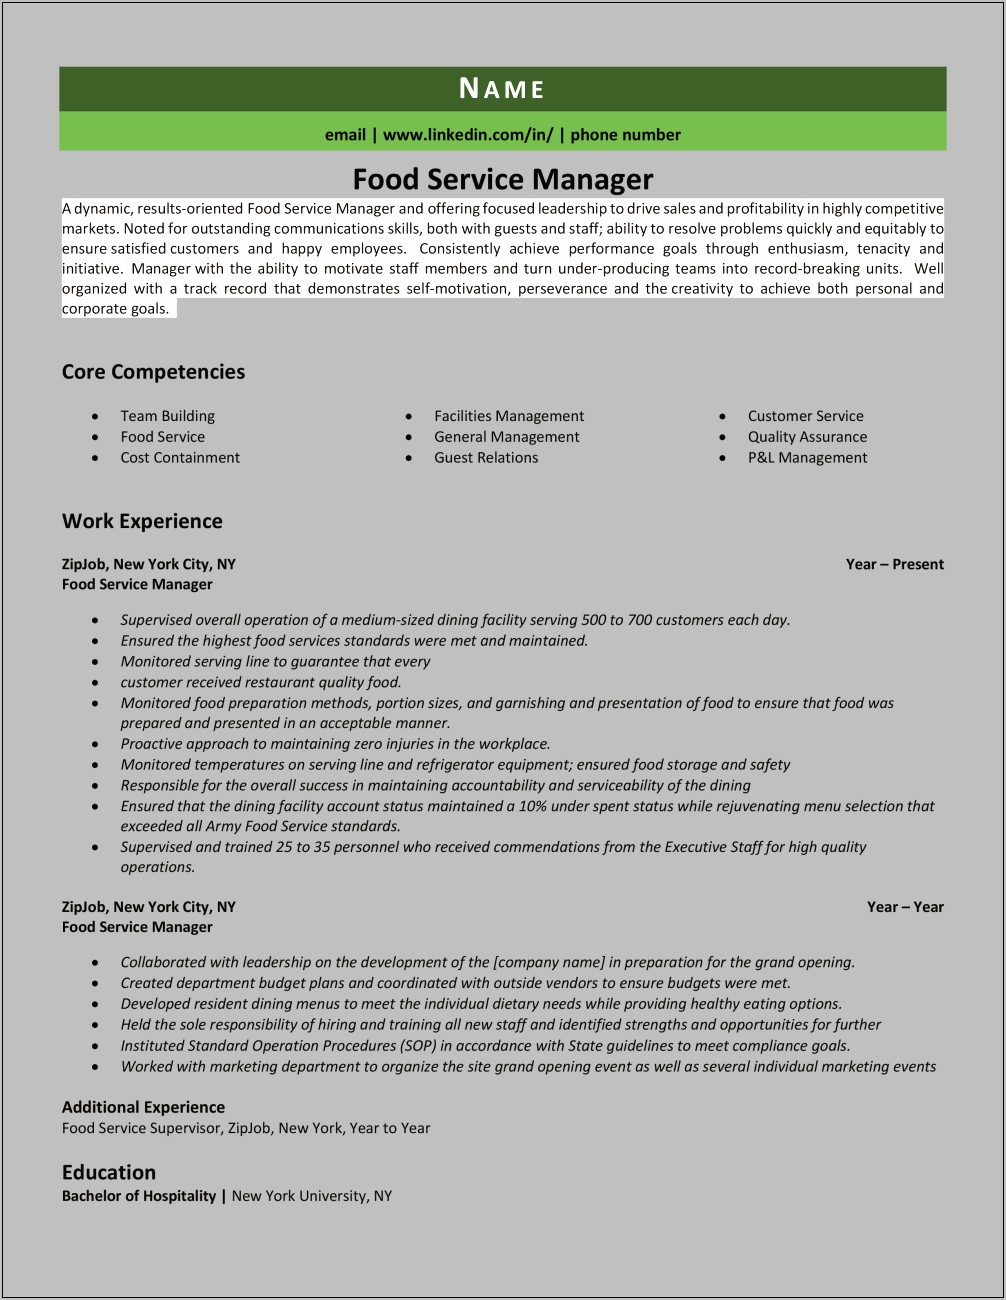 Food Service Industry Manager Resume